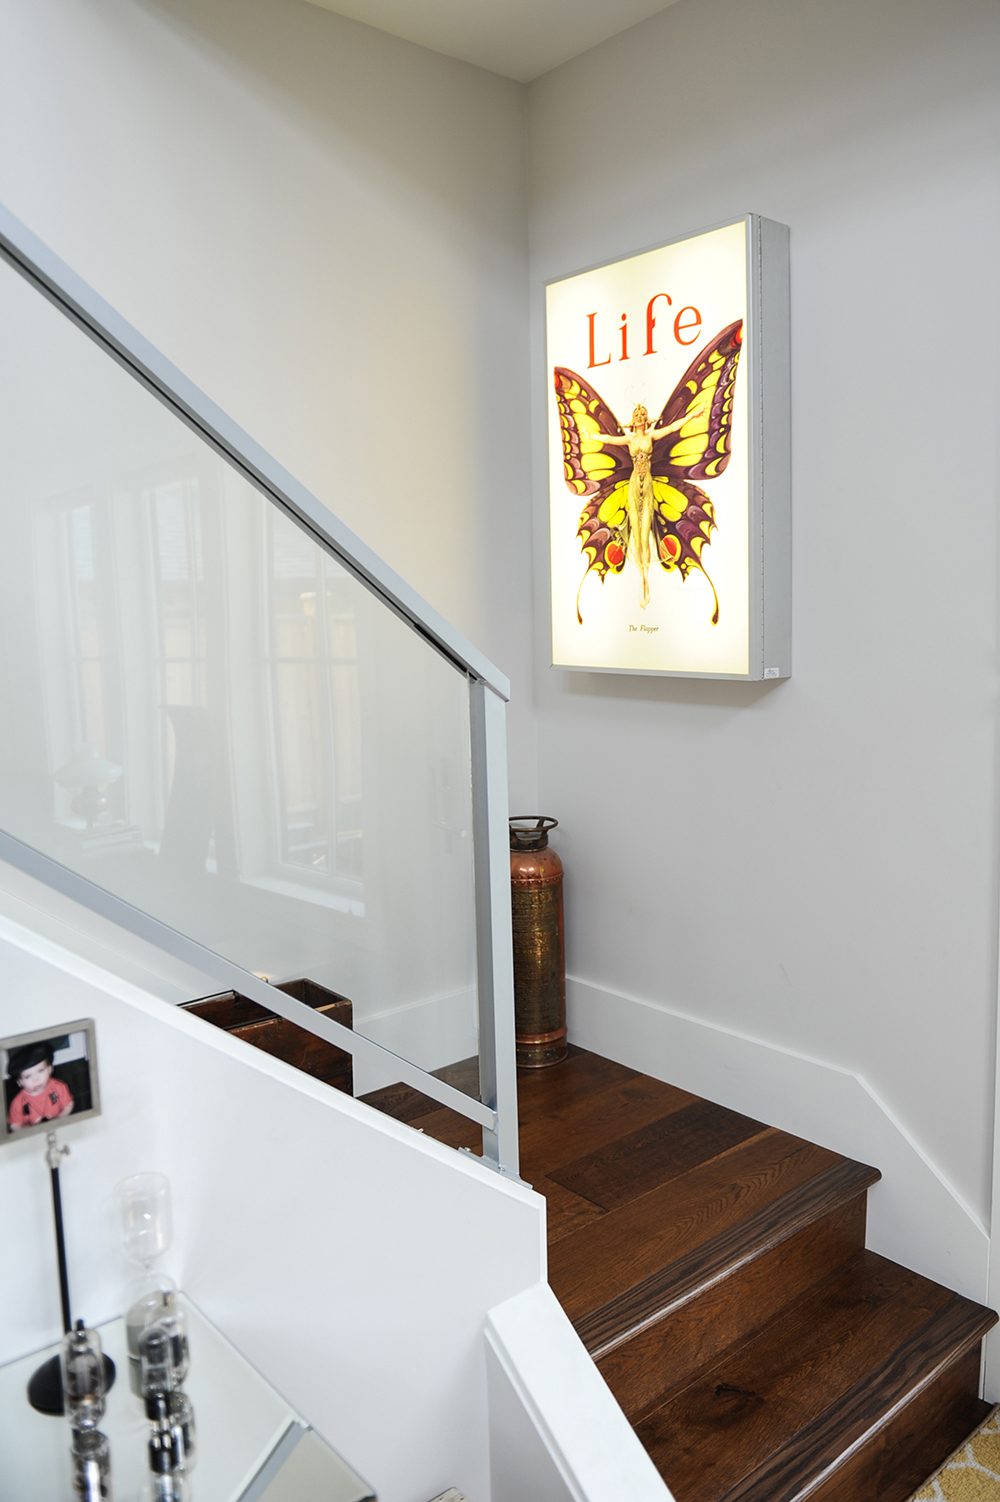 The light box above the stairs is an unlikely homage.